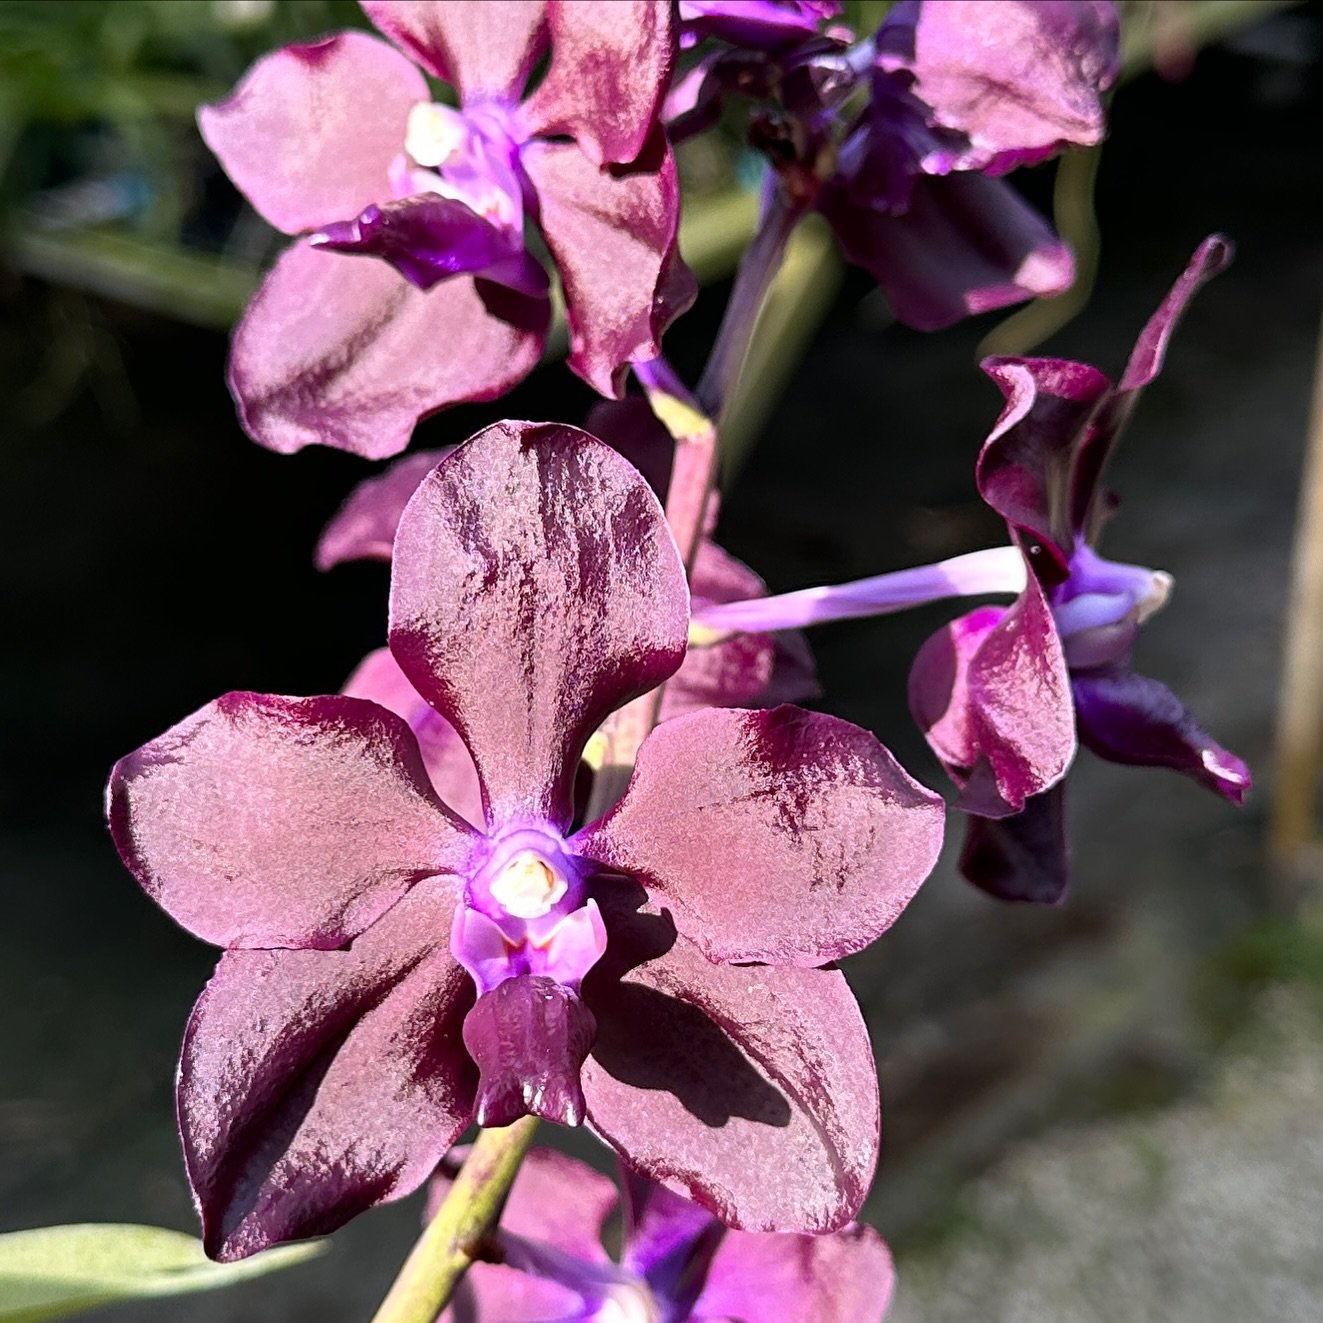 Love the way this x-18 caught the light this morning. 

Want to help us grow? Click &ldquo;follow&rdquo; then share the posts that make you go wow! Thanks!

.
.
.
.
#motesorchids
#FloridaOrchidGrowing #orchids #orchid #vanda #orchidoftheday #orchidpe